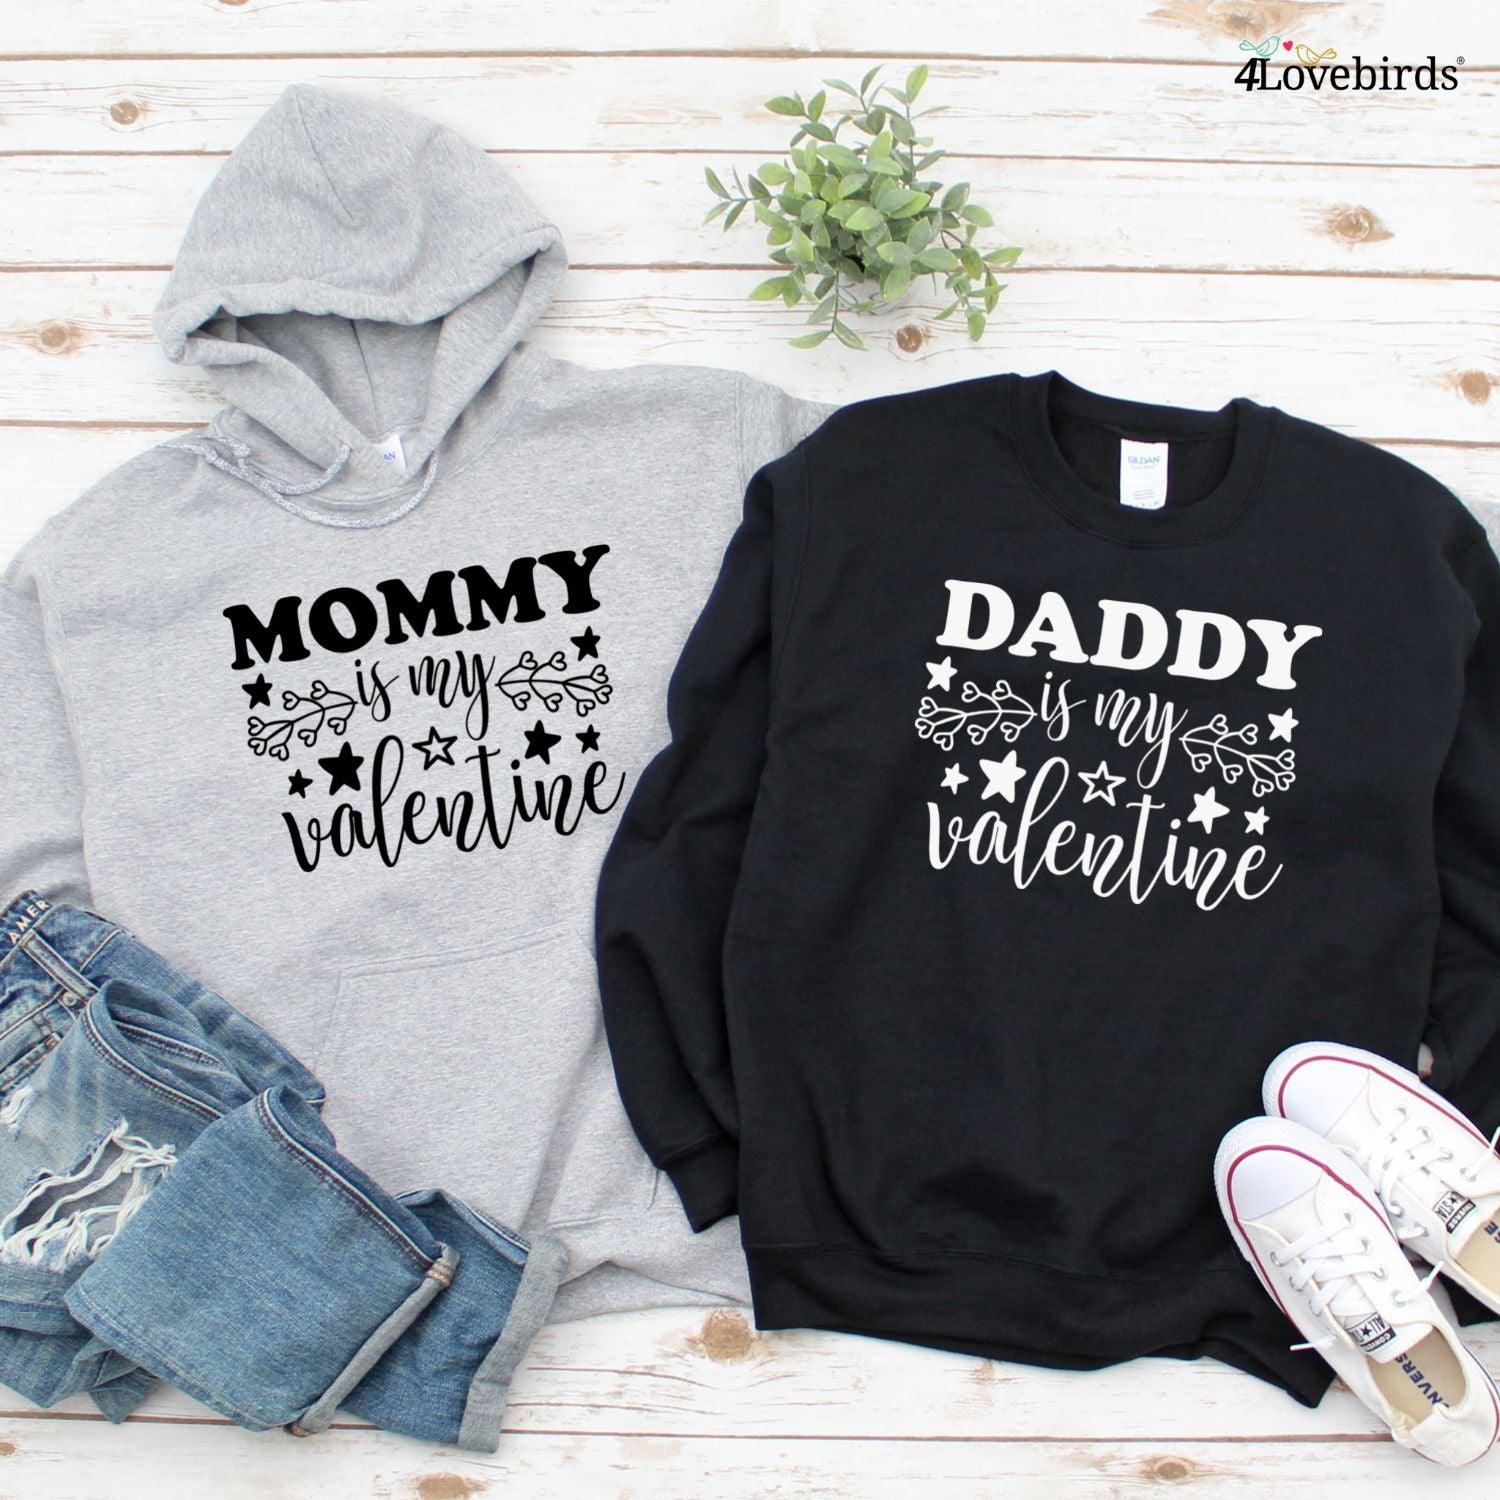 Valentine's Day Gift for Couples: Matching Set - Daddy & Mommy is My Valentine!" - 4Lovebirds